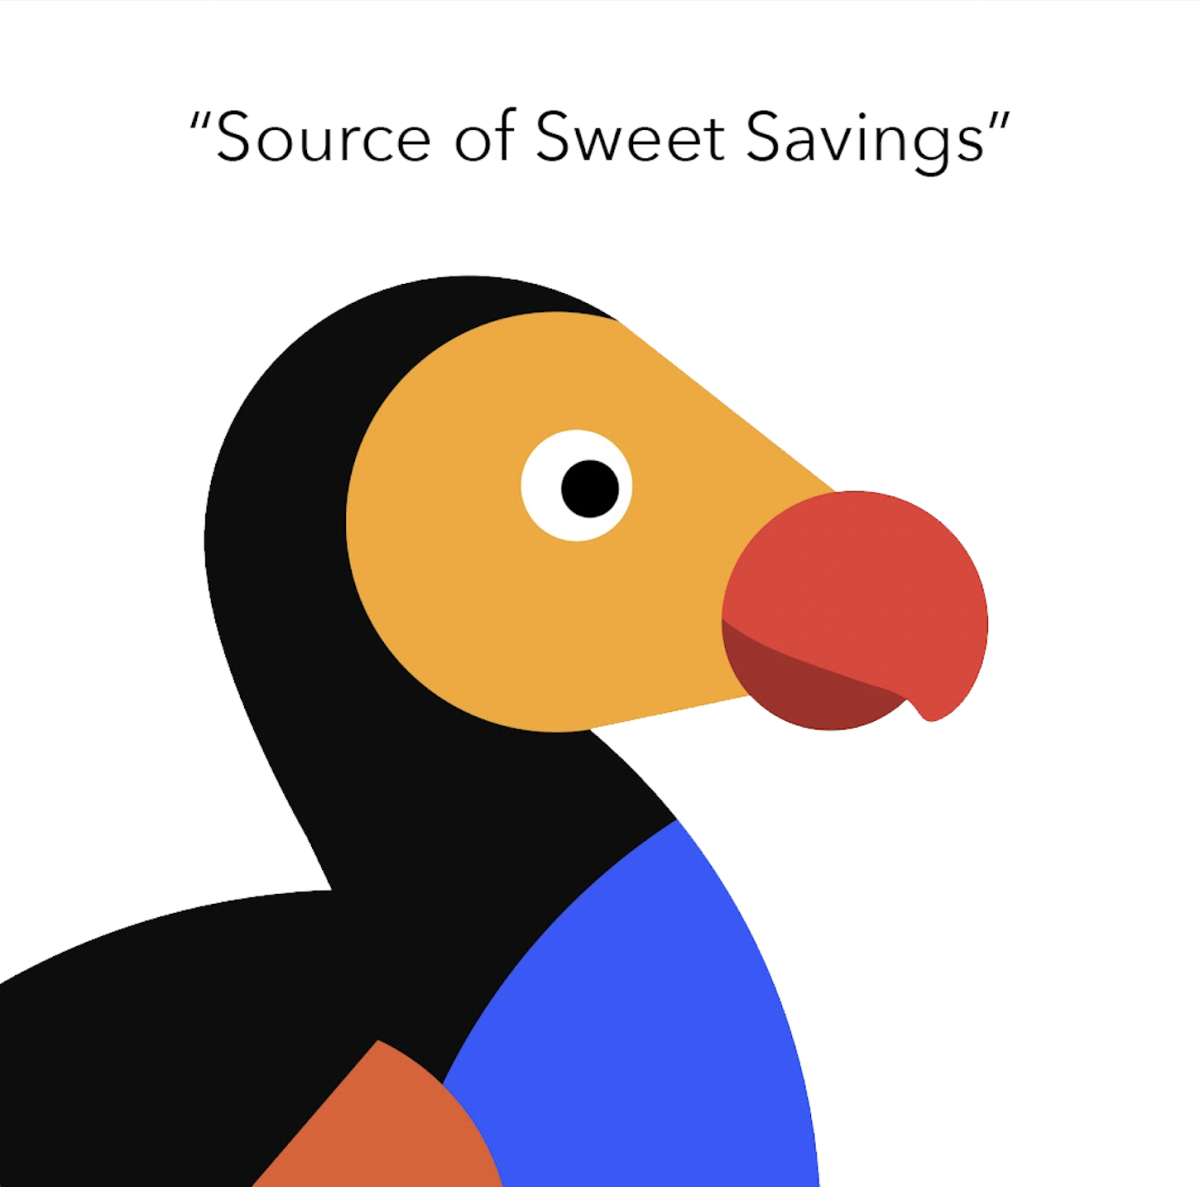 The+Dodo%3A+A+Source+of+Sweet+Saving